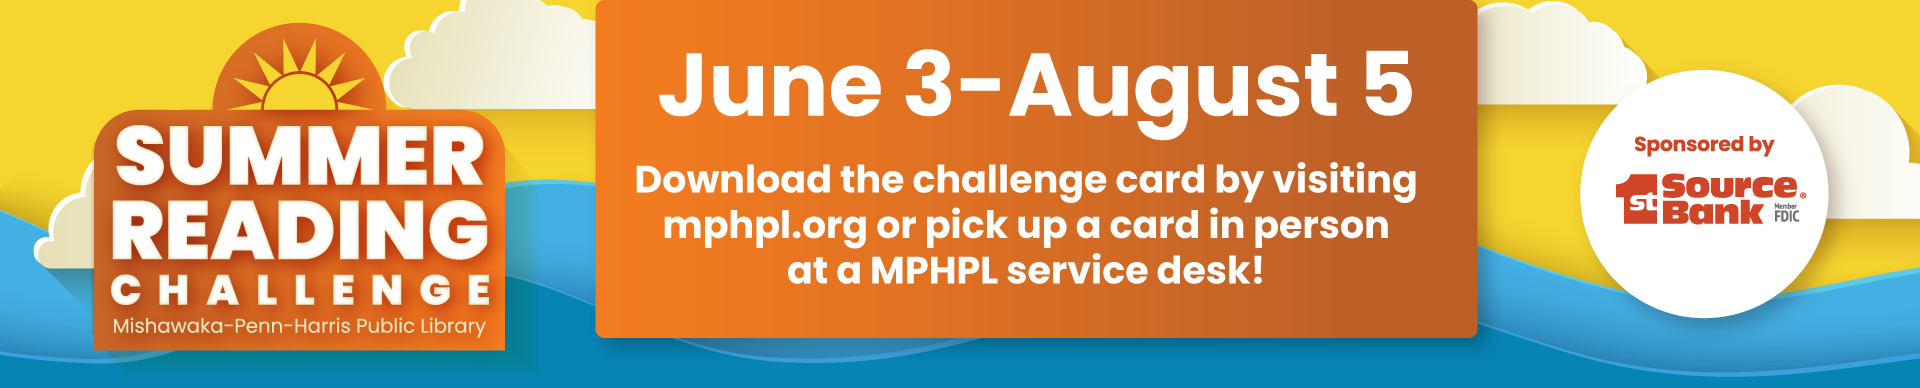 1st Source Bank logo. ‘June 3-August 5 Summer Reading Challenge Mishawaka-Penn-Harris Public Library. Download the challenge card by visiting mphpl.org or pick up a card in person at a MPHPL service desk!’ 